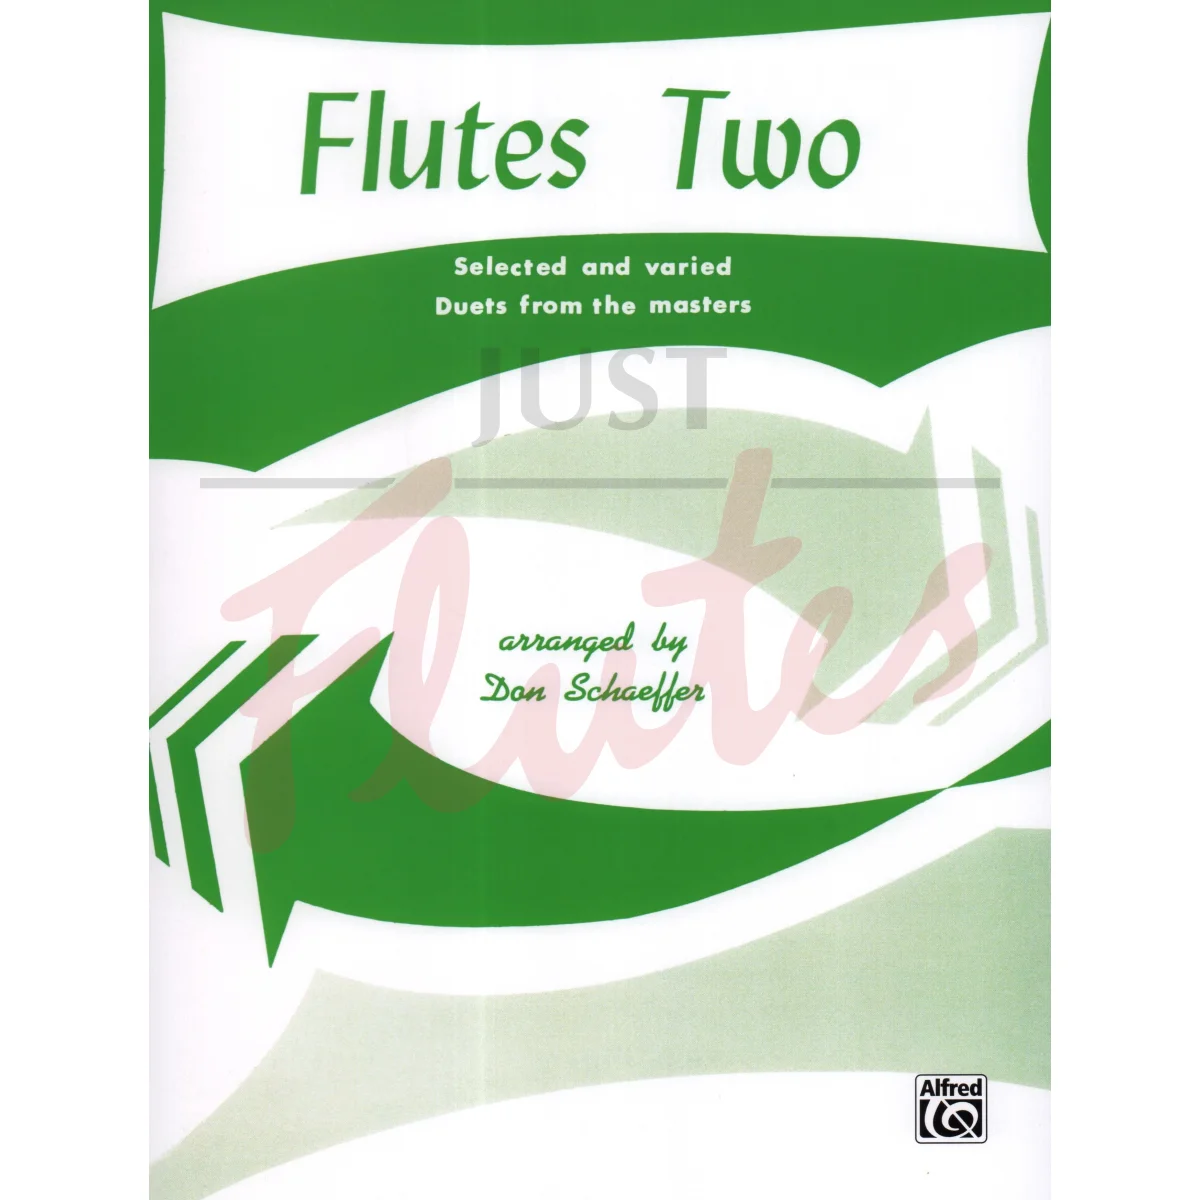 Flutes Two: Selected and Varied Duets from the Masters for Two Flutes